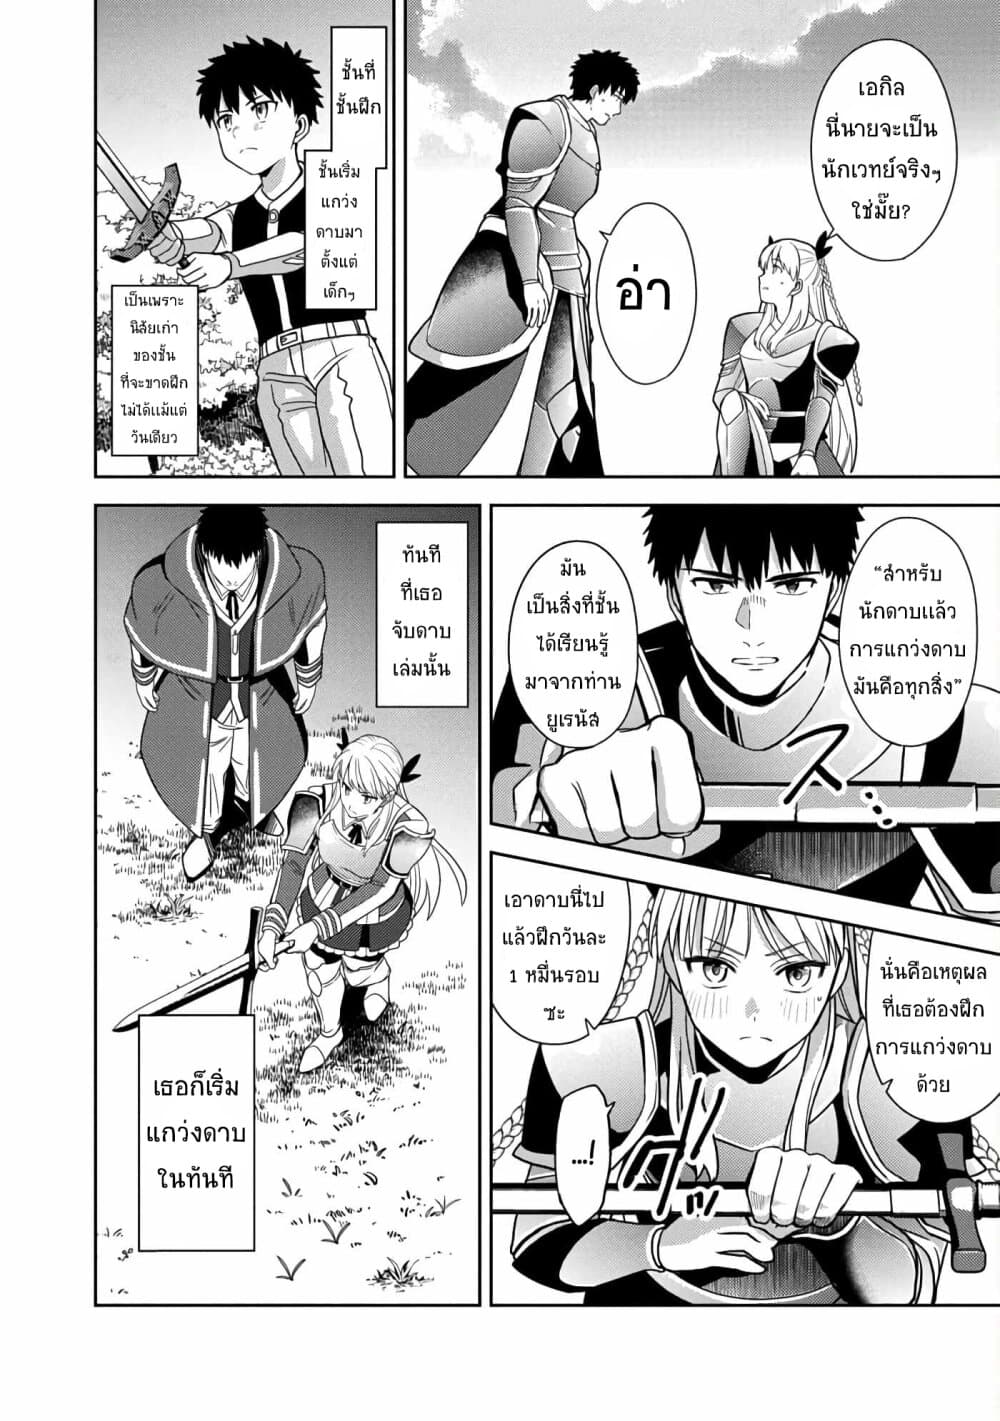 The Reincarnated Swordsman With 9999 Strength Wants to Become a Magician! ตอนที่ 4.1 (11)